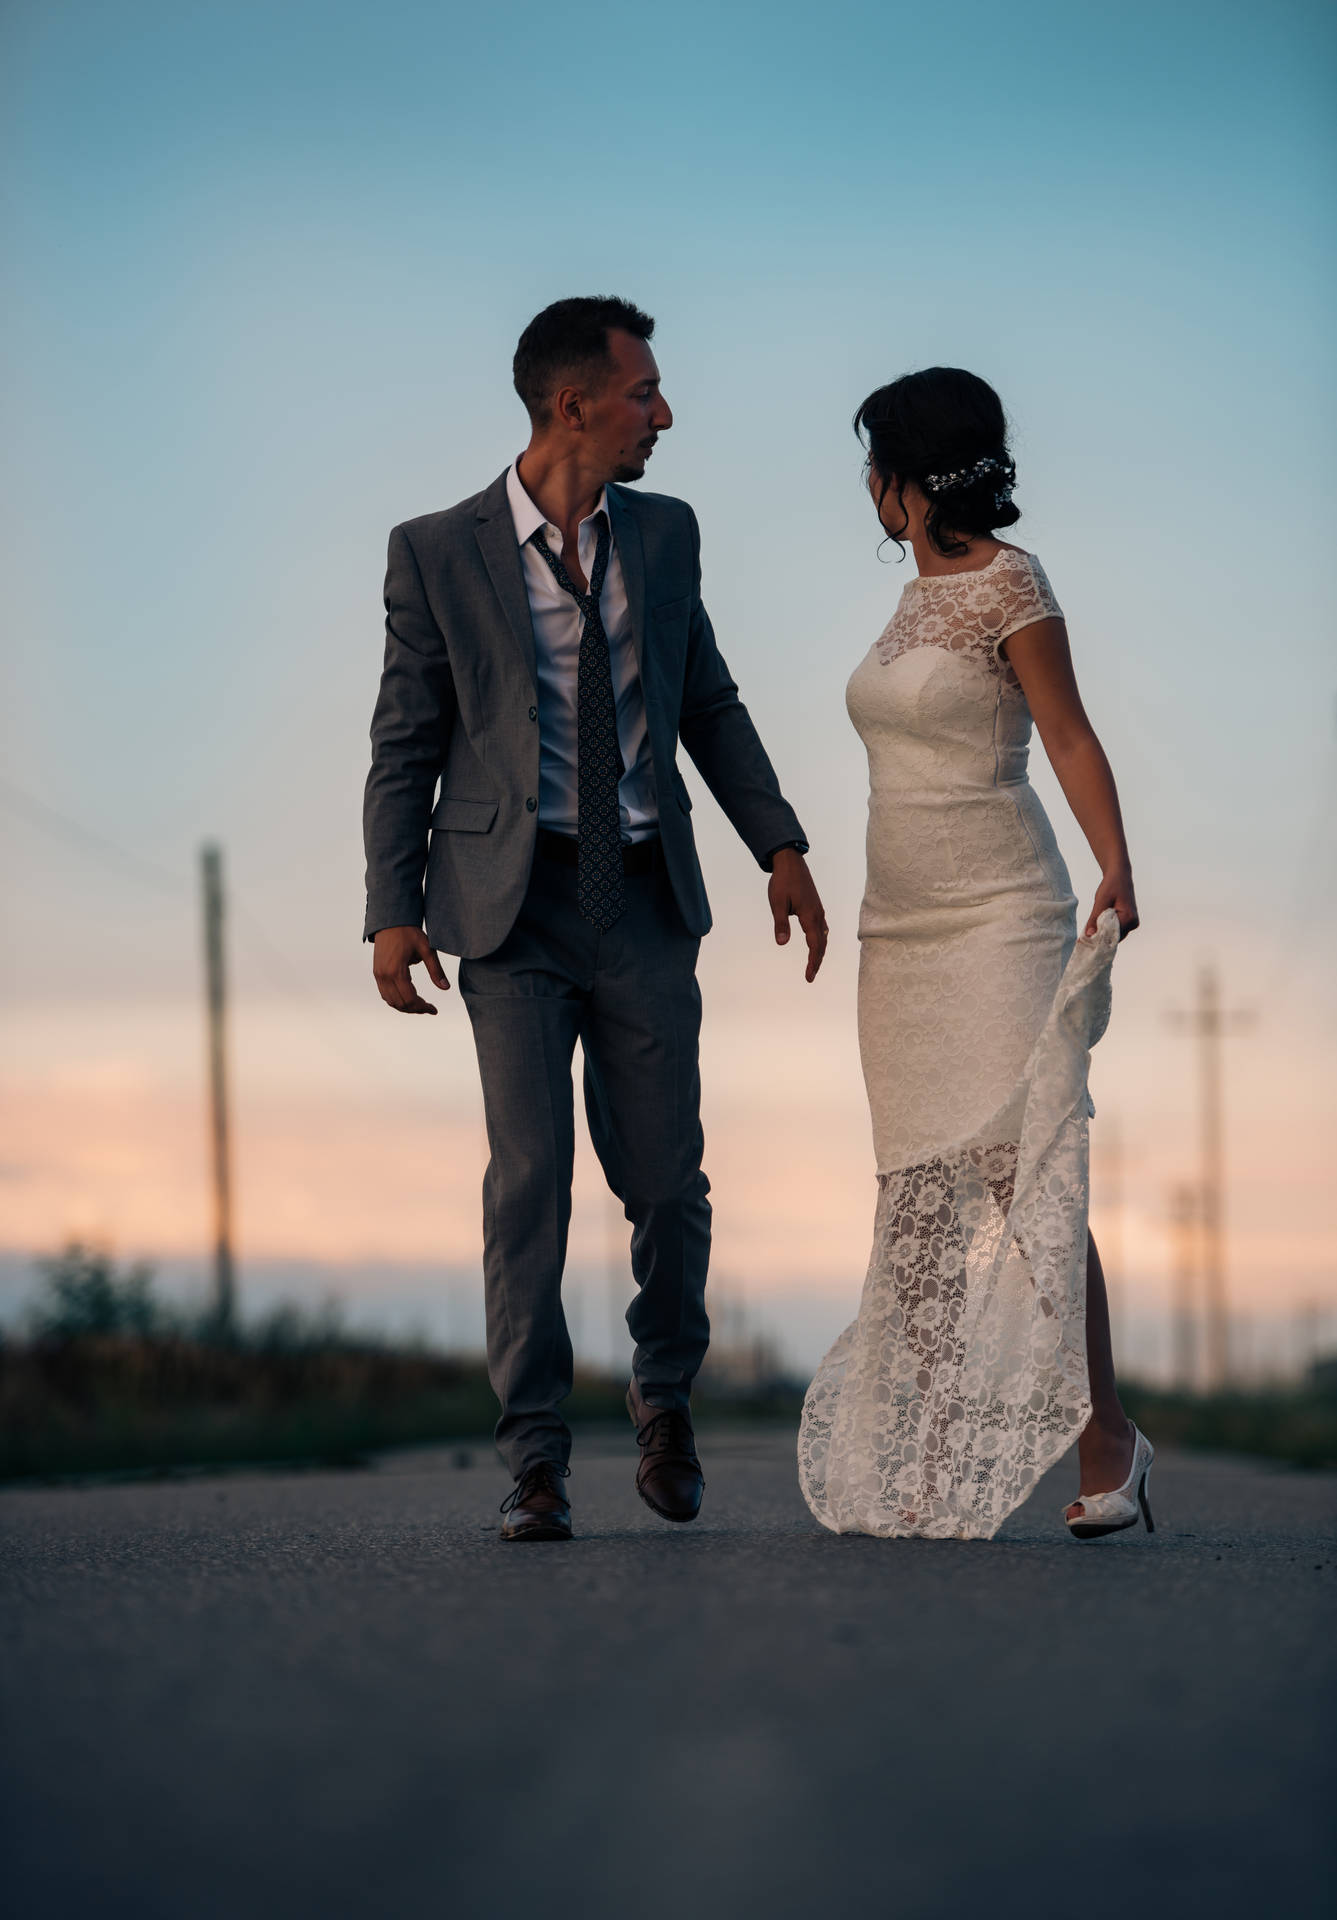 Groom And Bride In Road